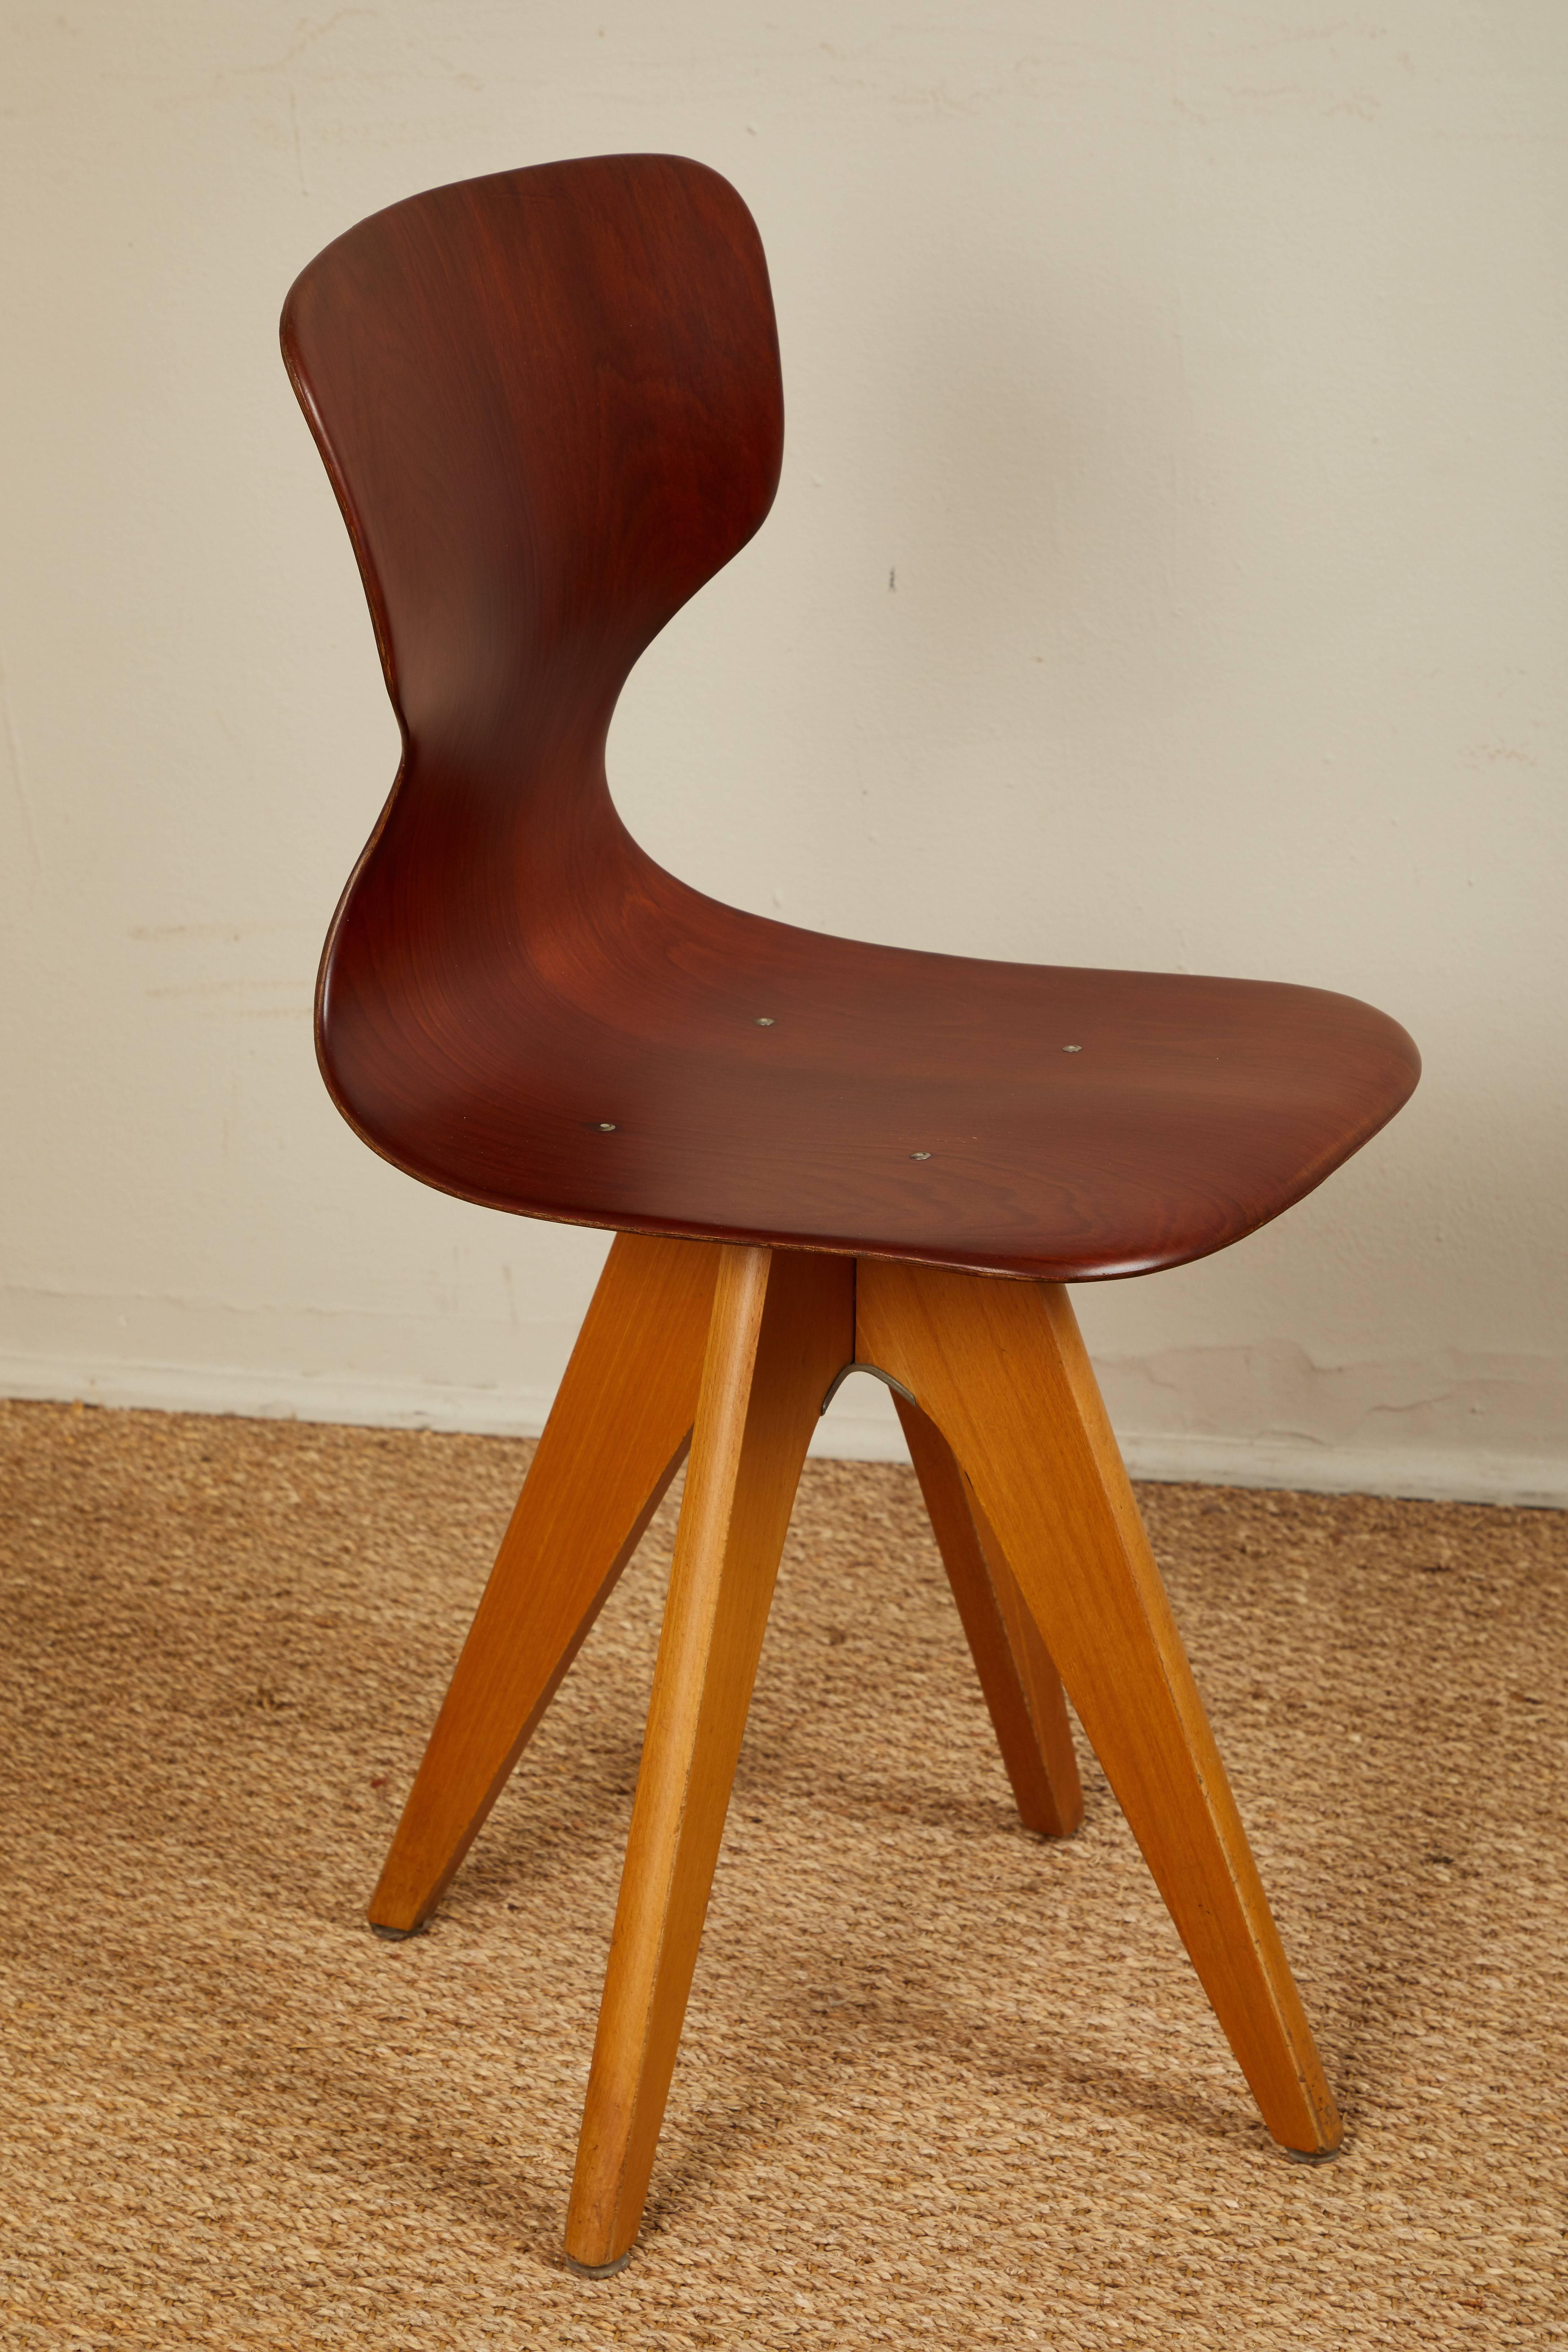 20th Century Mid Century German School Chairs For Sale